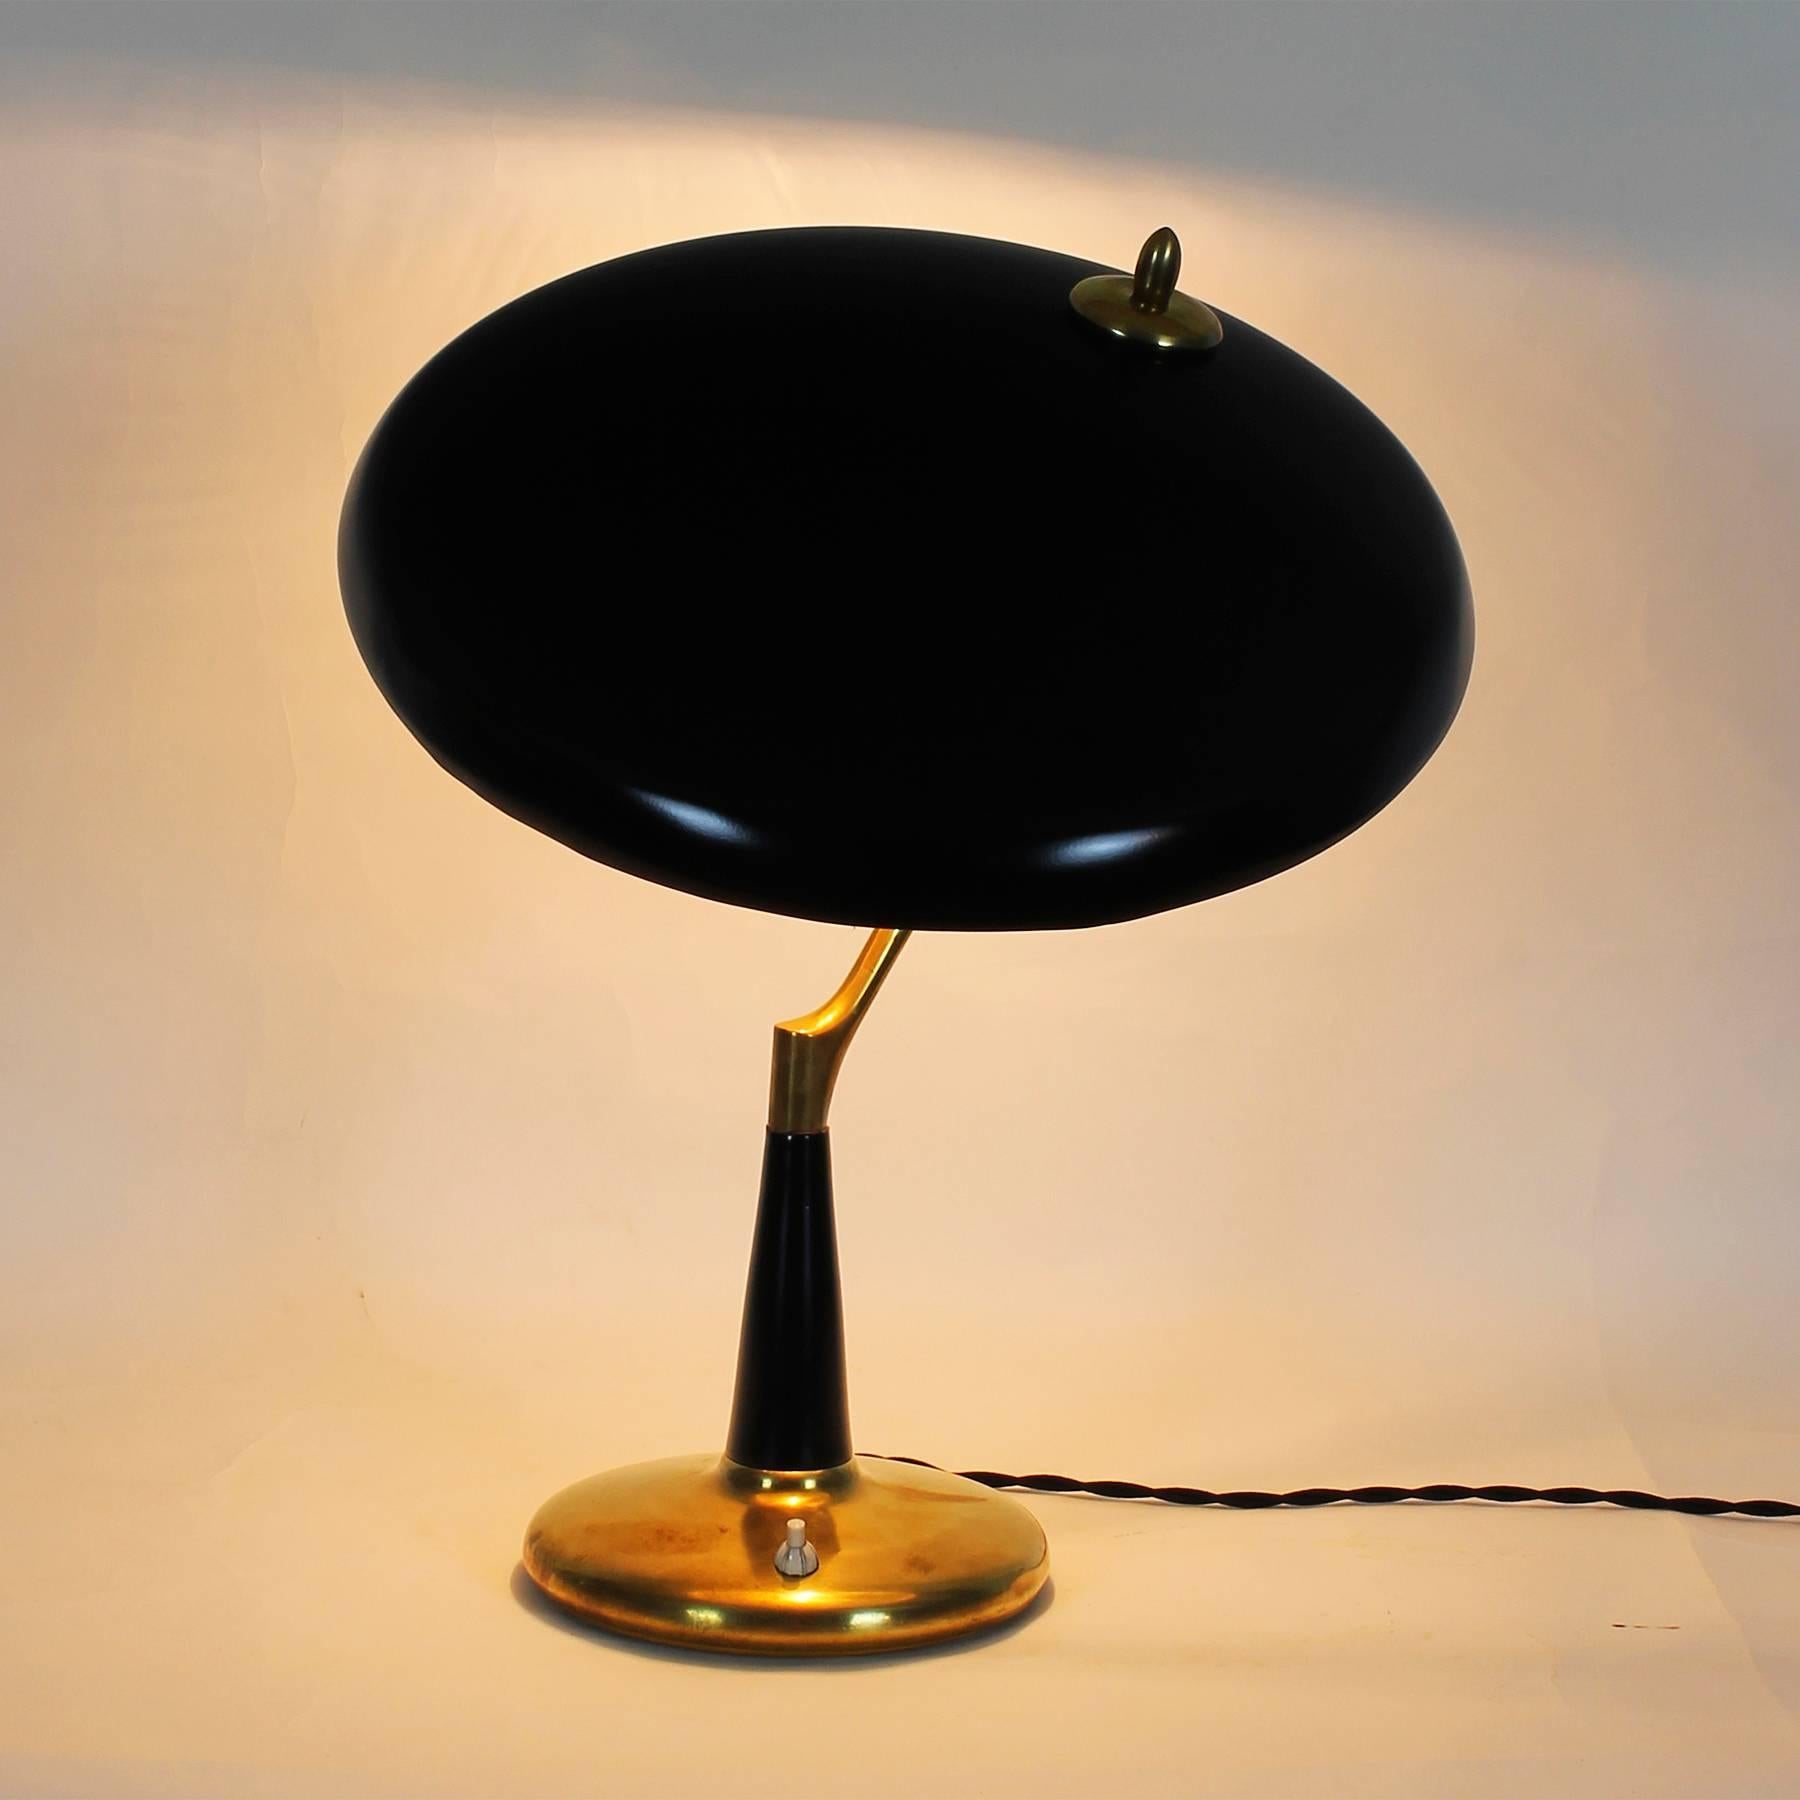 Brass 1956 Table Lamp by Oscar Torlasco for Lumi, brass, sheet metal - Italy